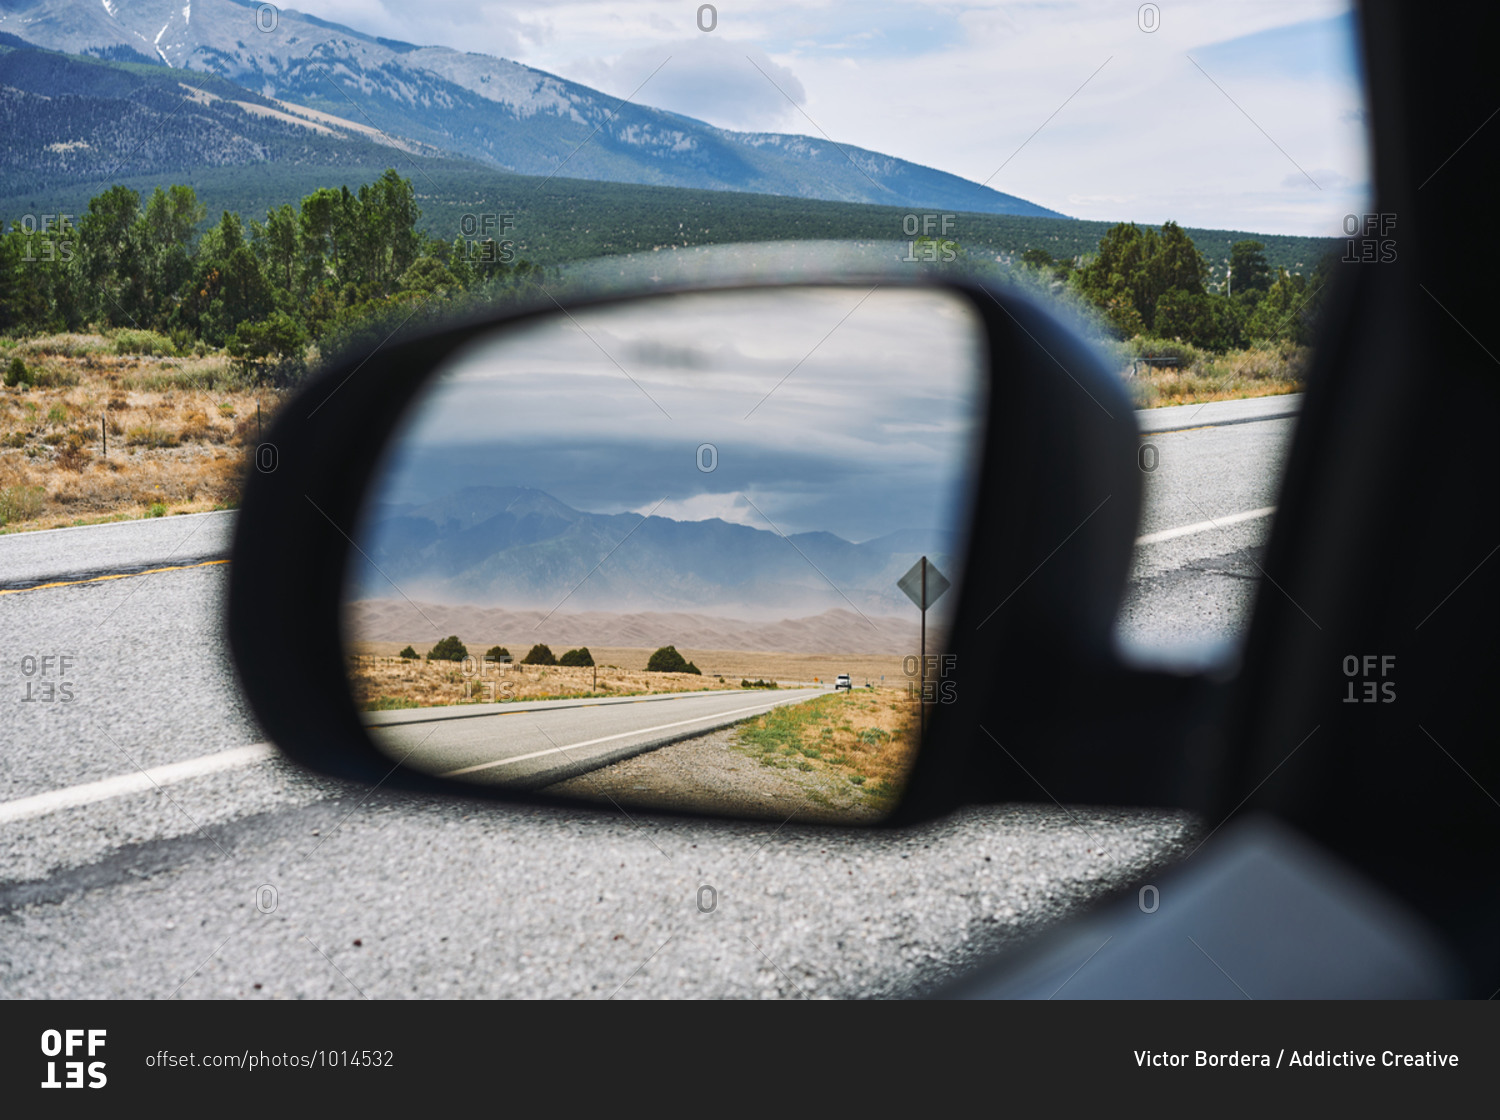 Automobile driving along asphalt road on background of mountains and reflecting in side view mirror